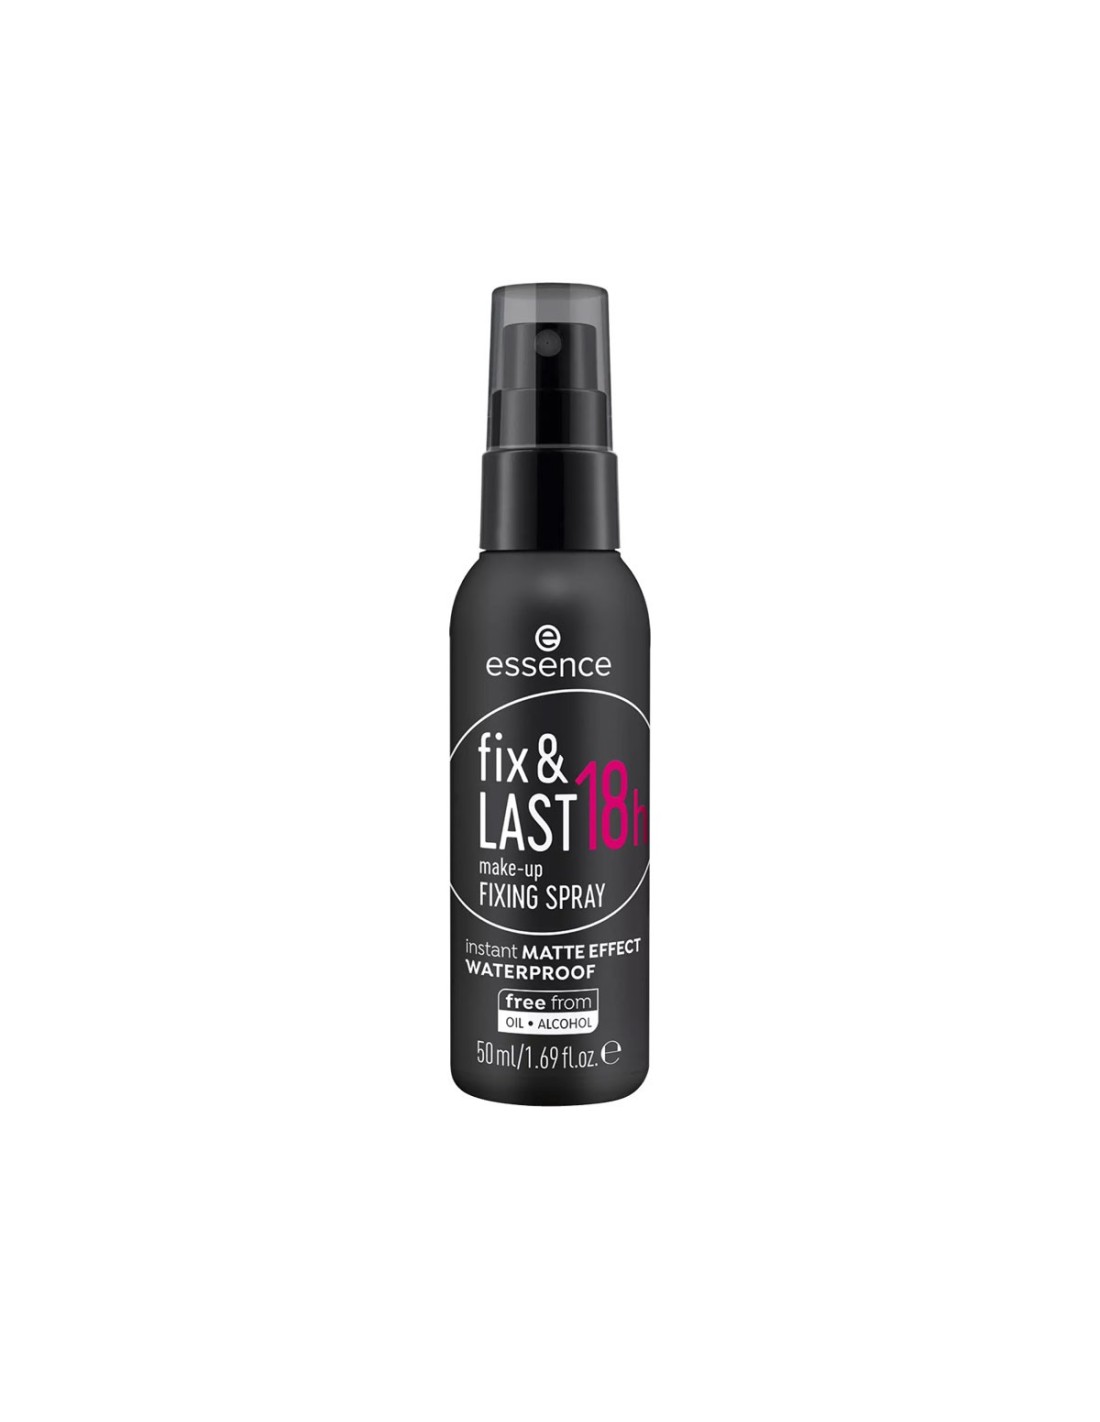 https://boxofcolor.in/9534-thickbox_default/essence-fix-and-last-18h-make-up-fixing-spray-50ml.jpg